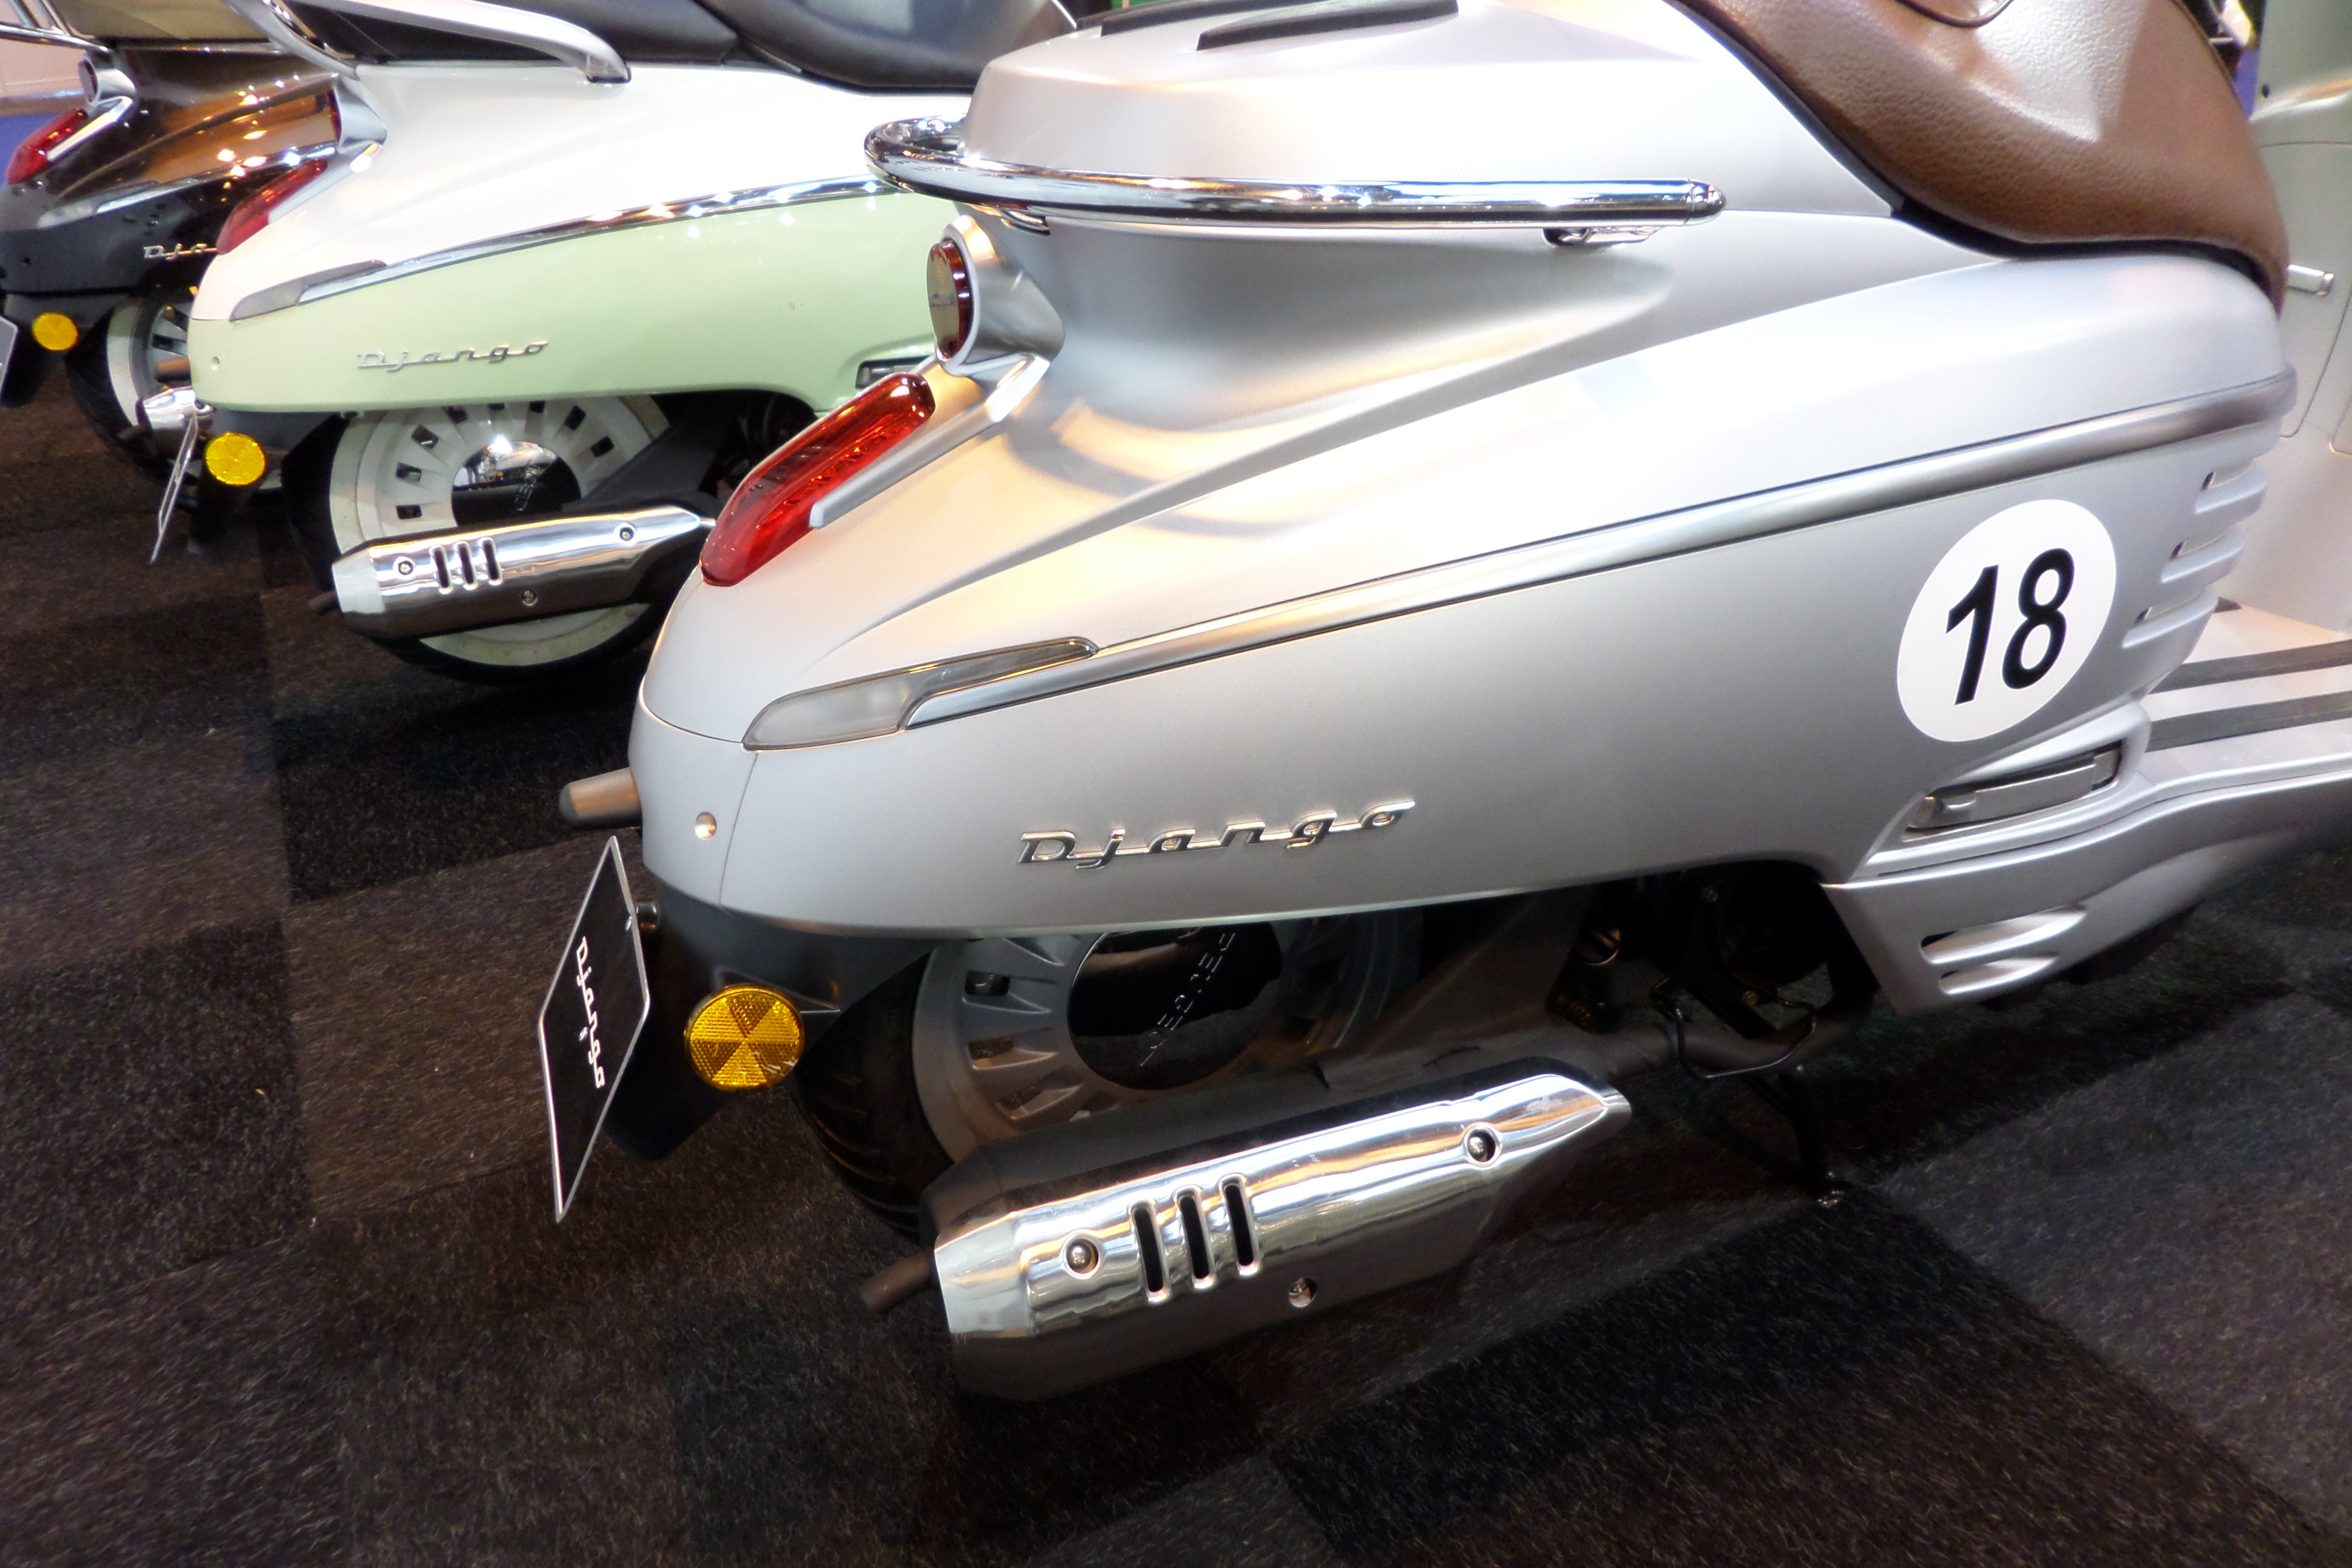 New: Peugeot Django retro scooters, available this summer